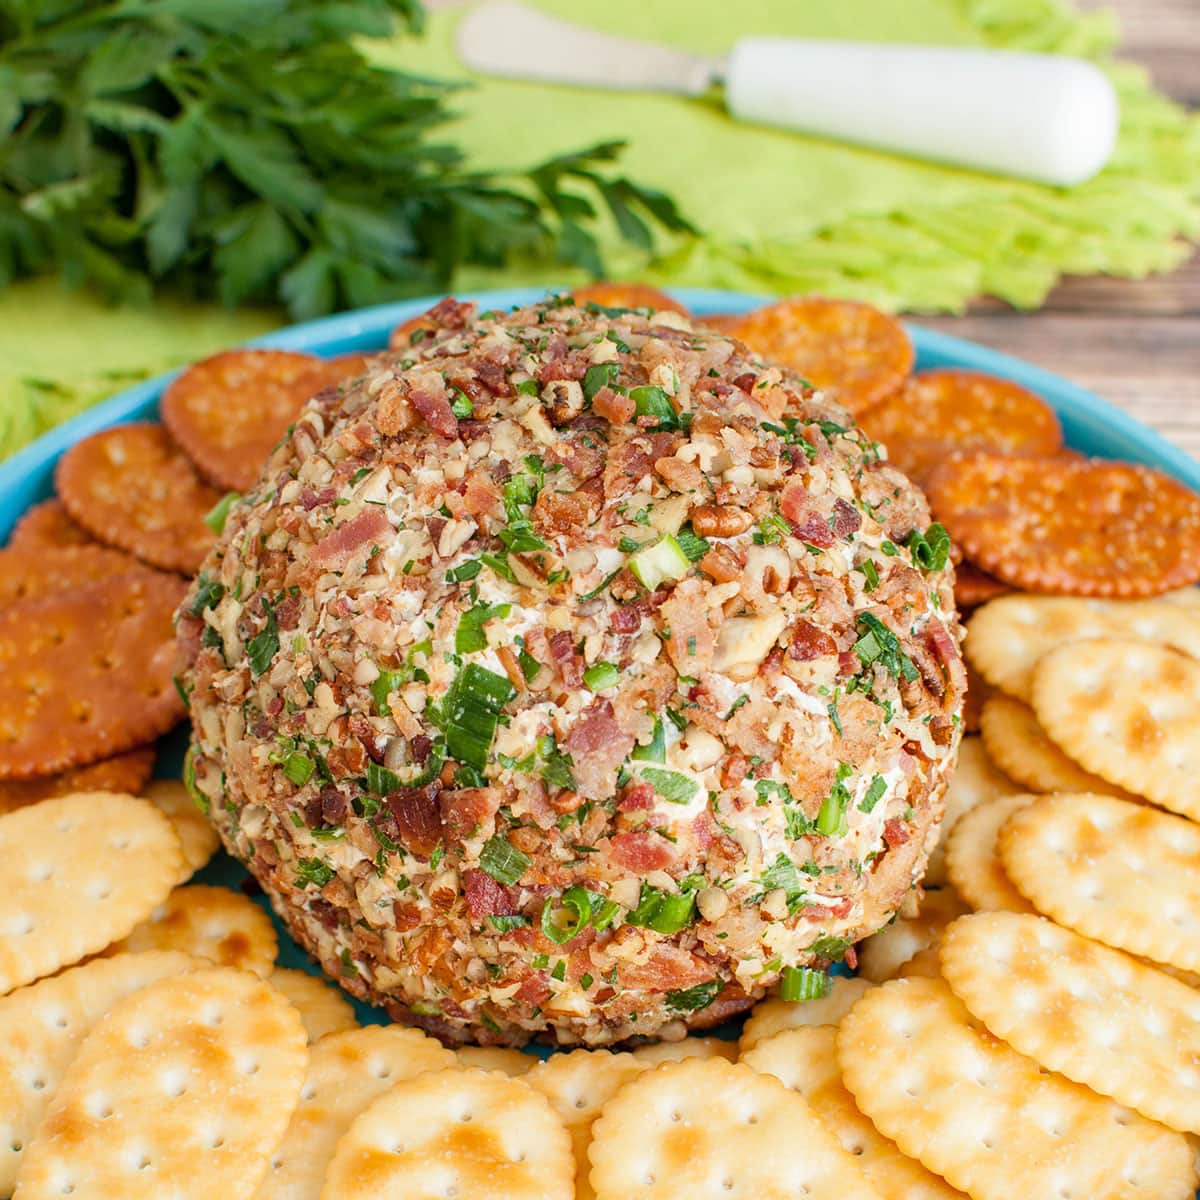 banch ranch cheese ball on teal blue platter with crackers